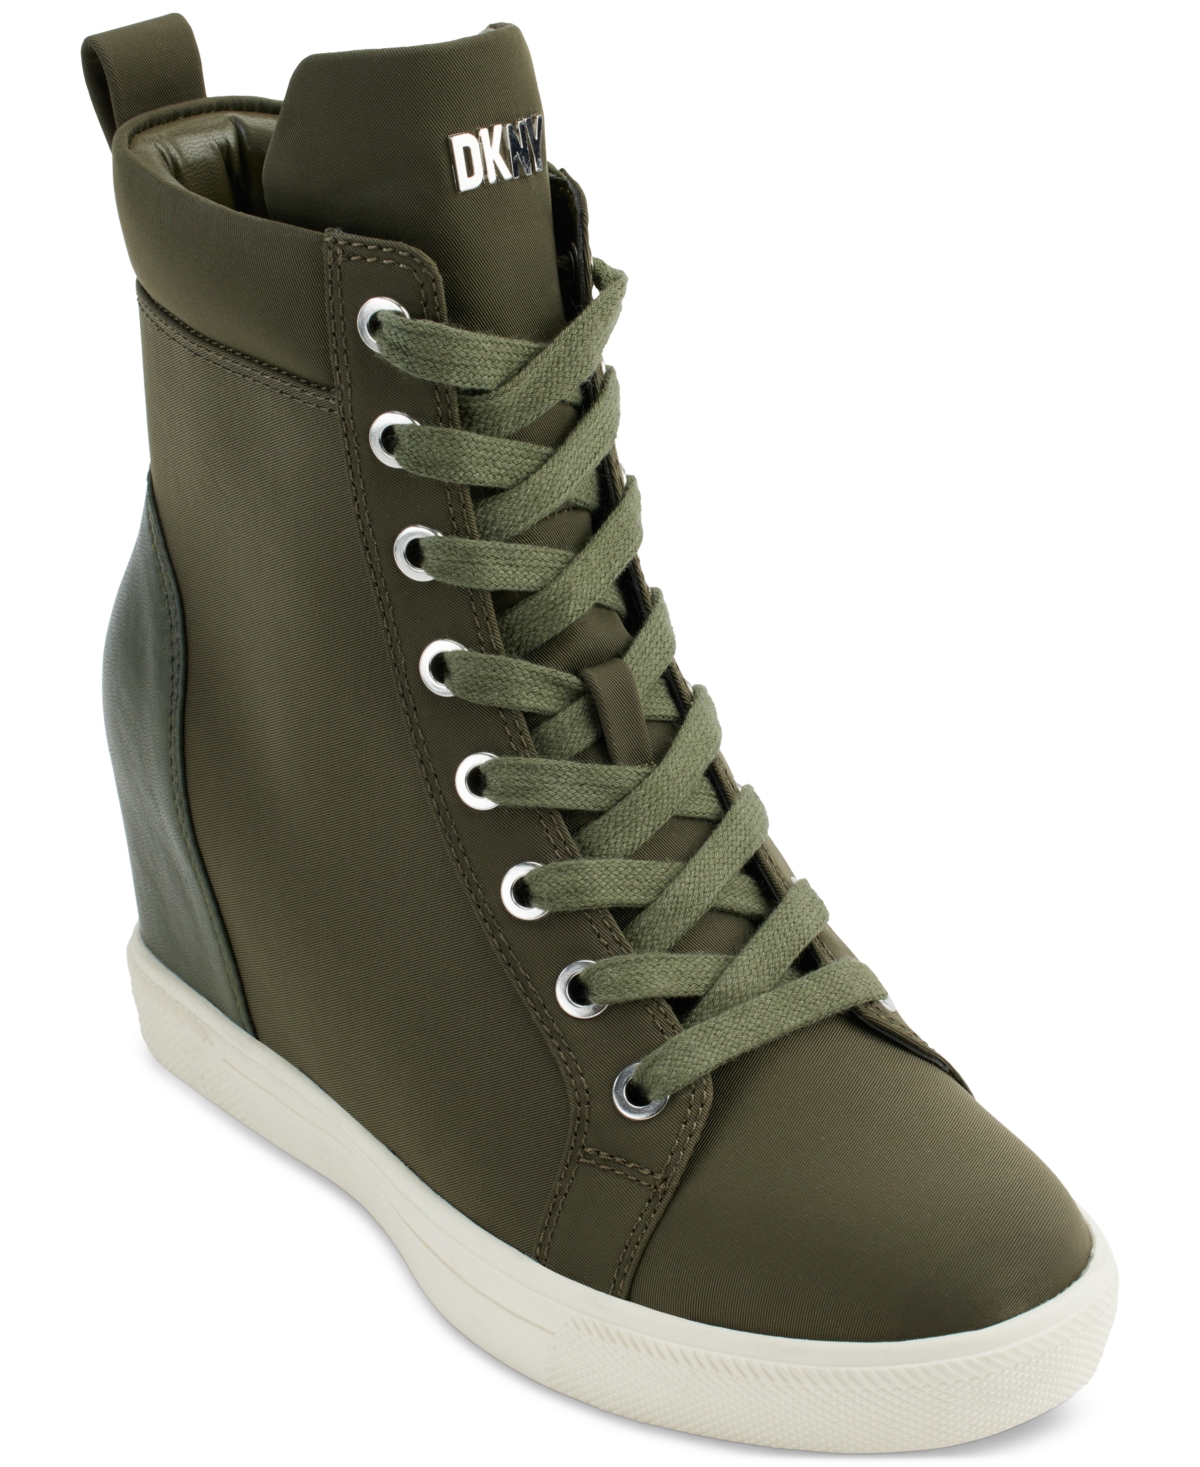 Ud over apotek retfærdig Dkny Women's Calz Lace-Up High-Top Wedge Sneakers | Smart Closet